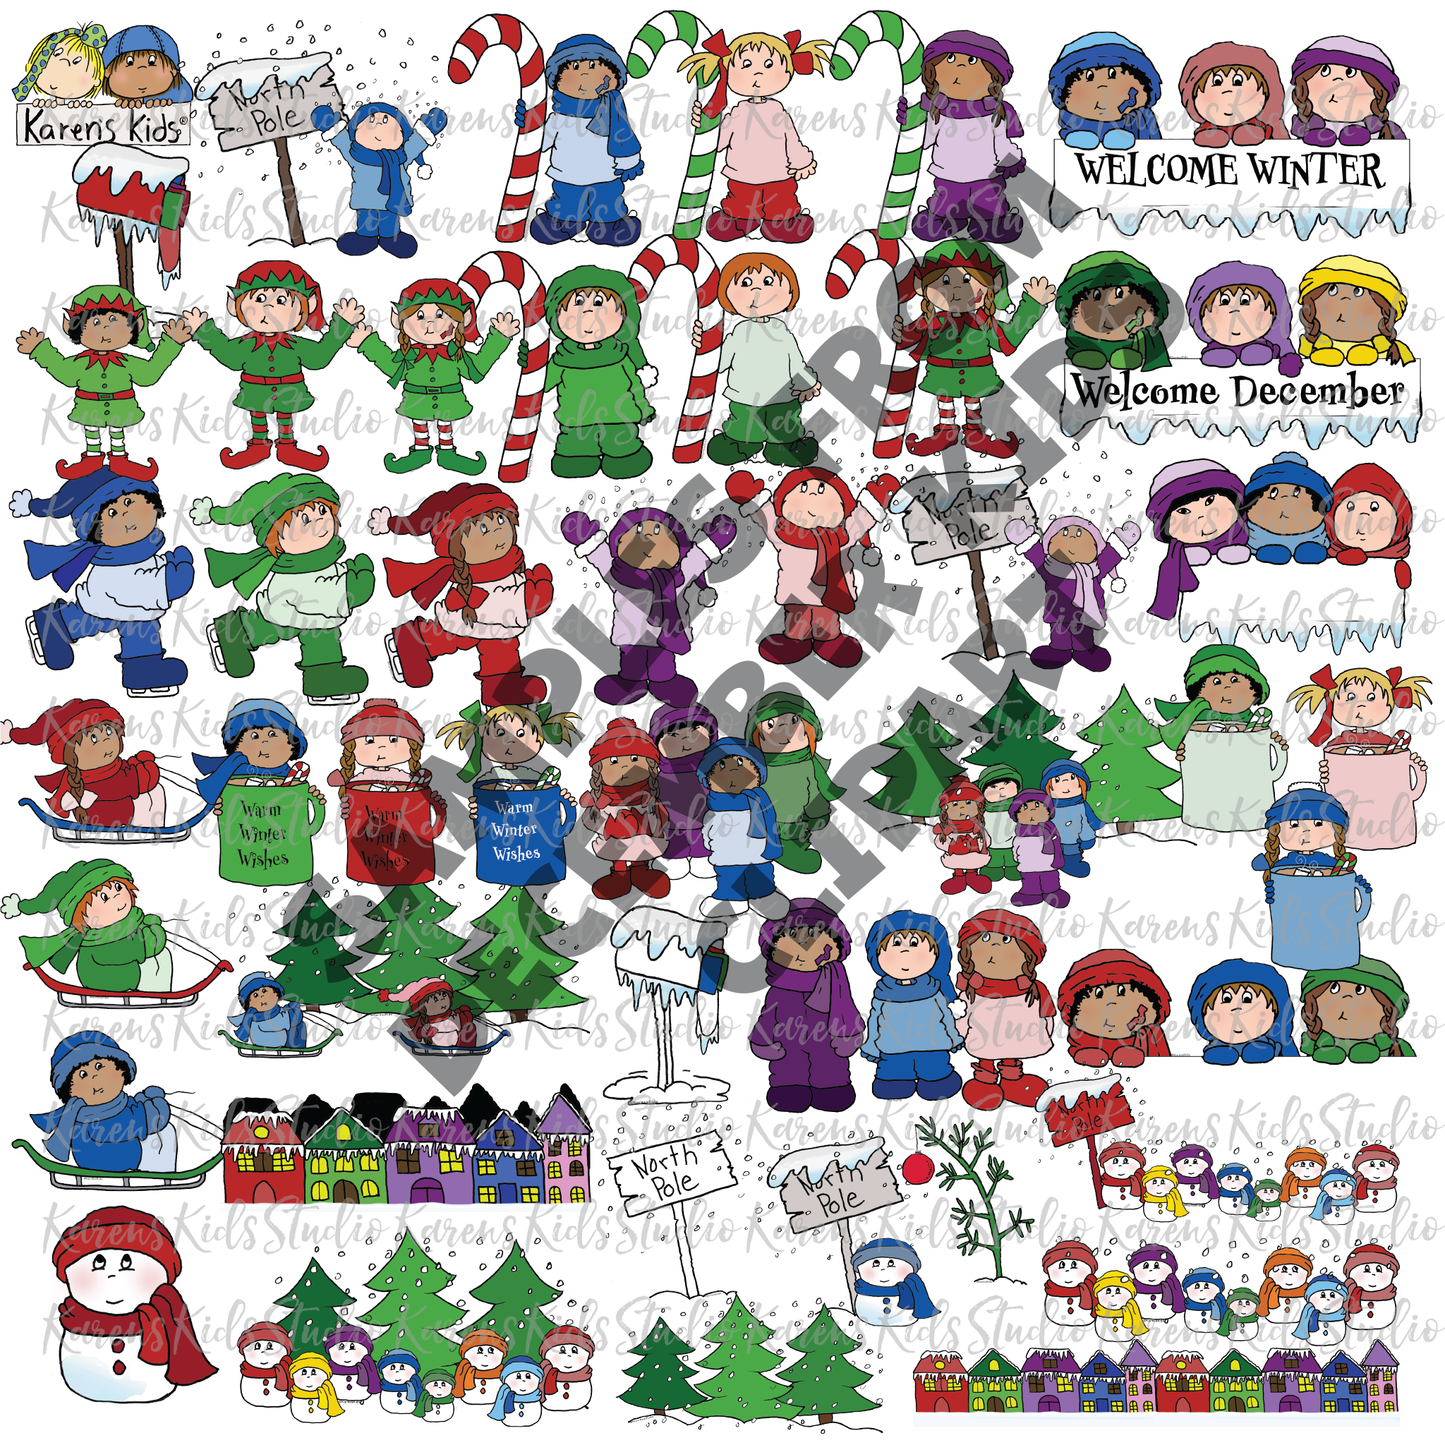 Samples of colorful clipart images of winter and December elves, snowmen, North Pole and more.